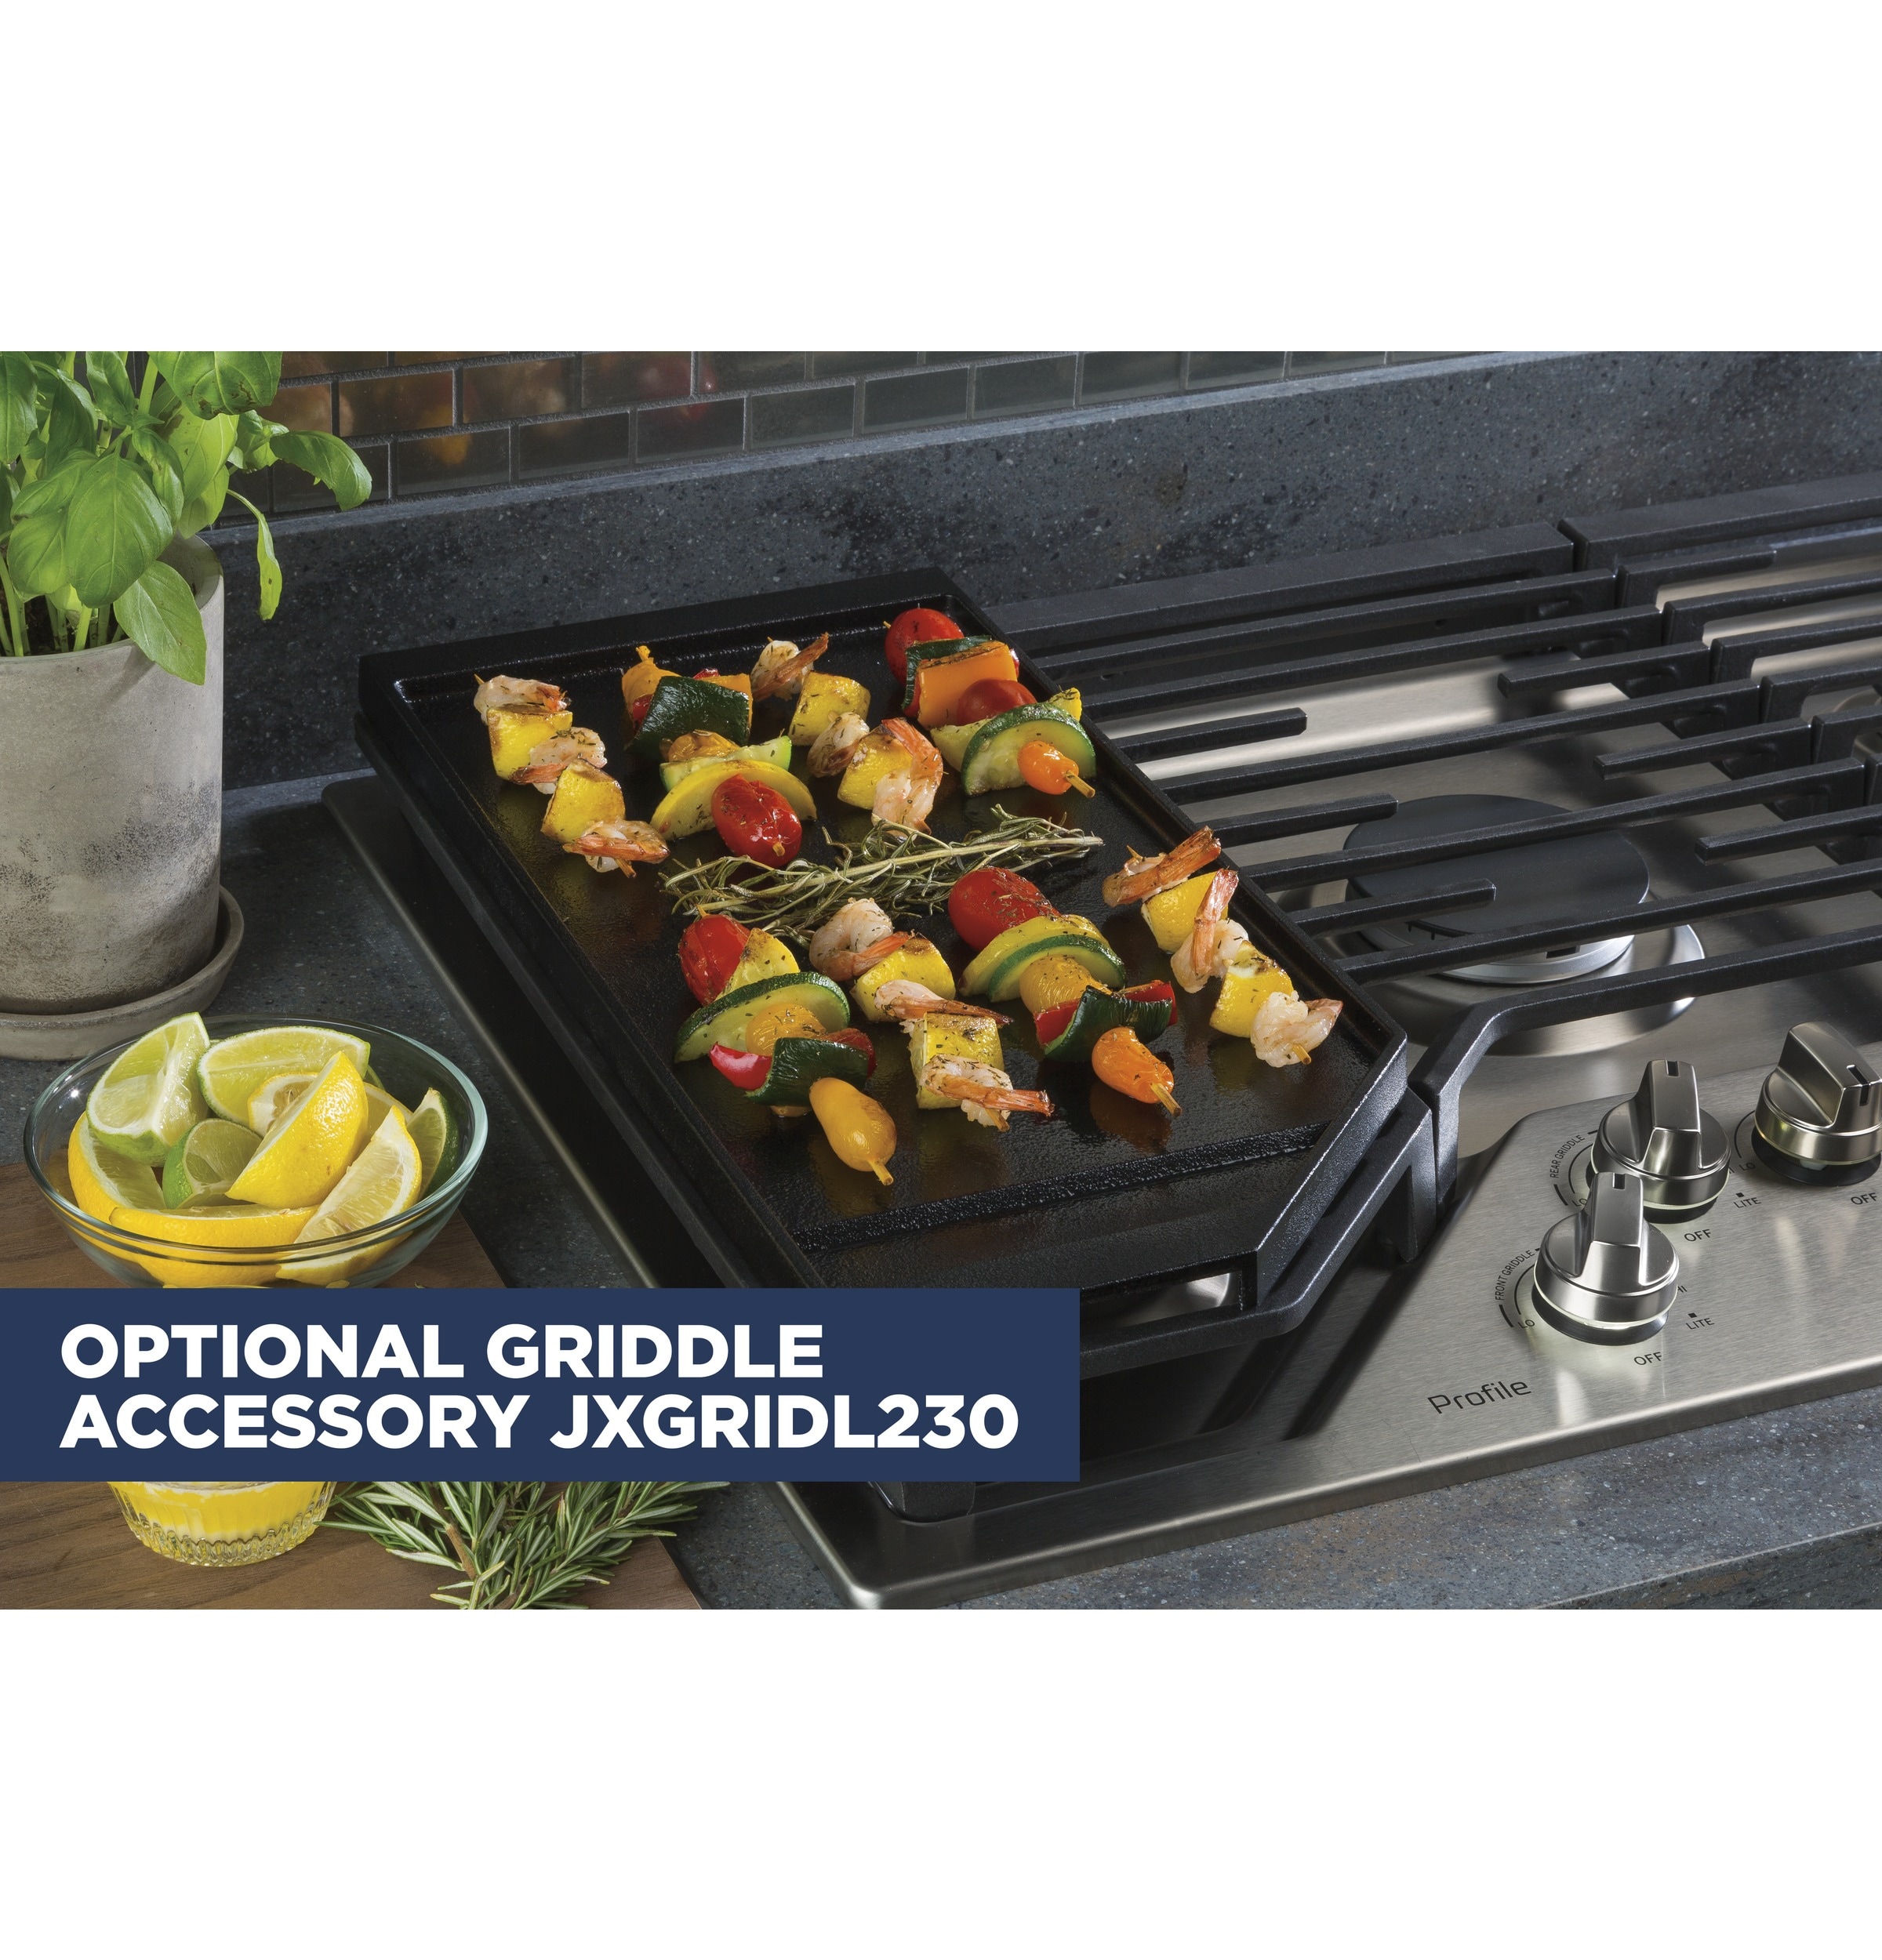 Thor Kitchen Cast Iron Double Burner Griddle Plate RG1032 - The